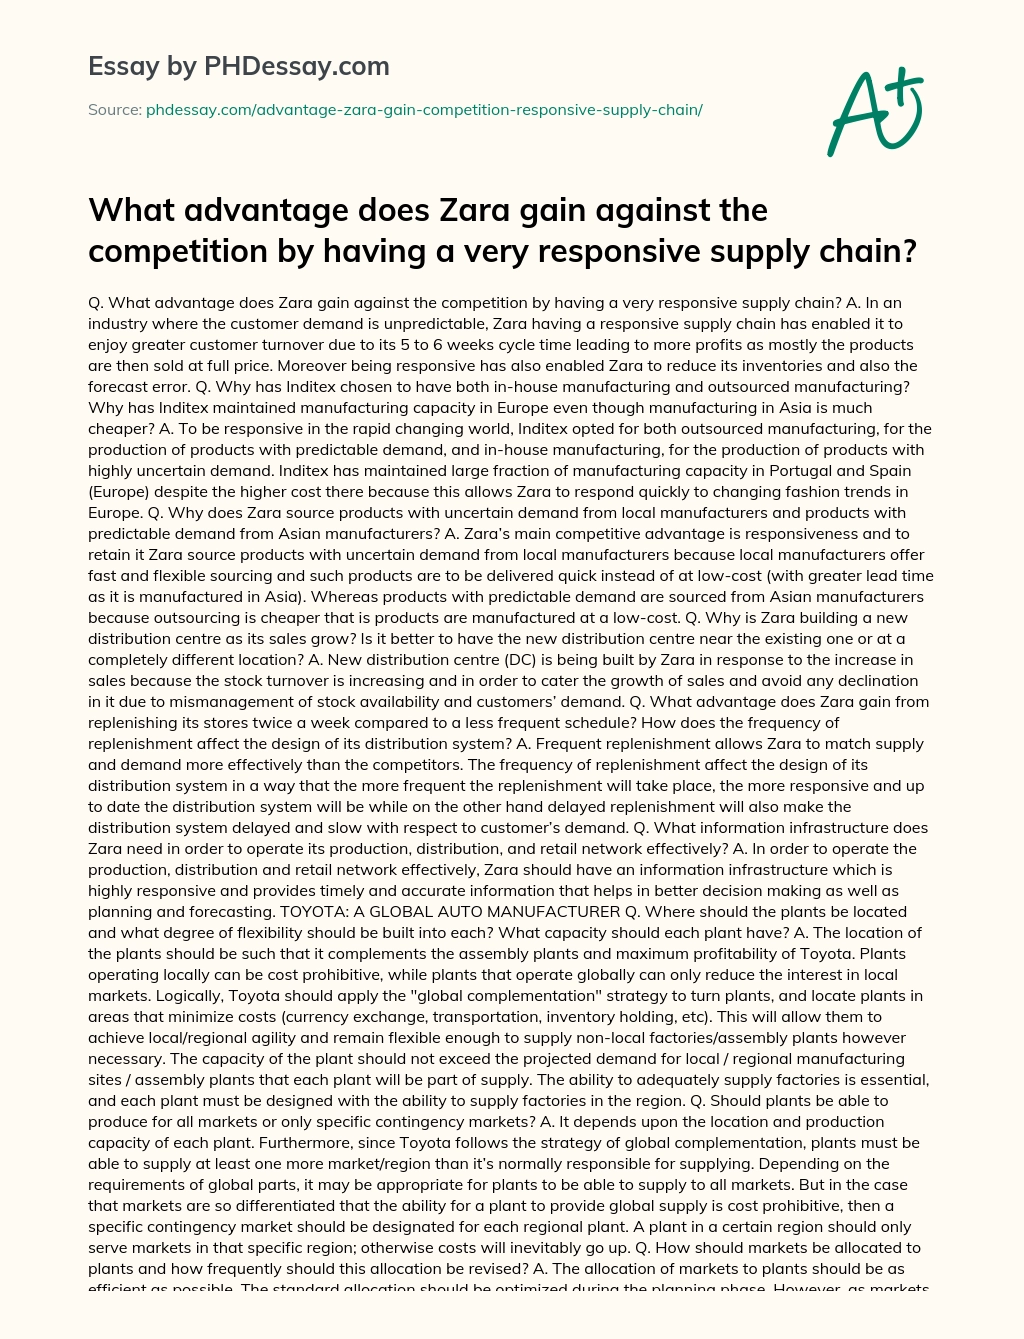 What advantage does Zara gain against the competition by having a very responsive supply chain? essay